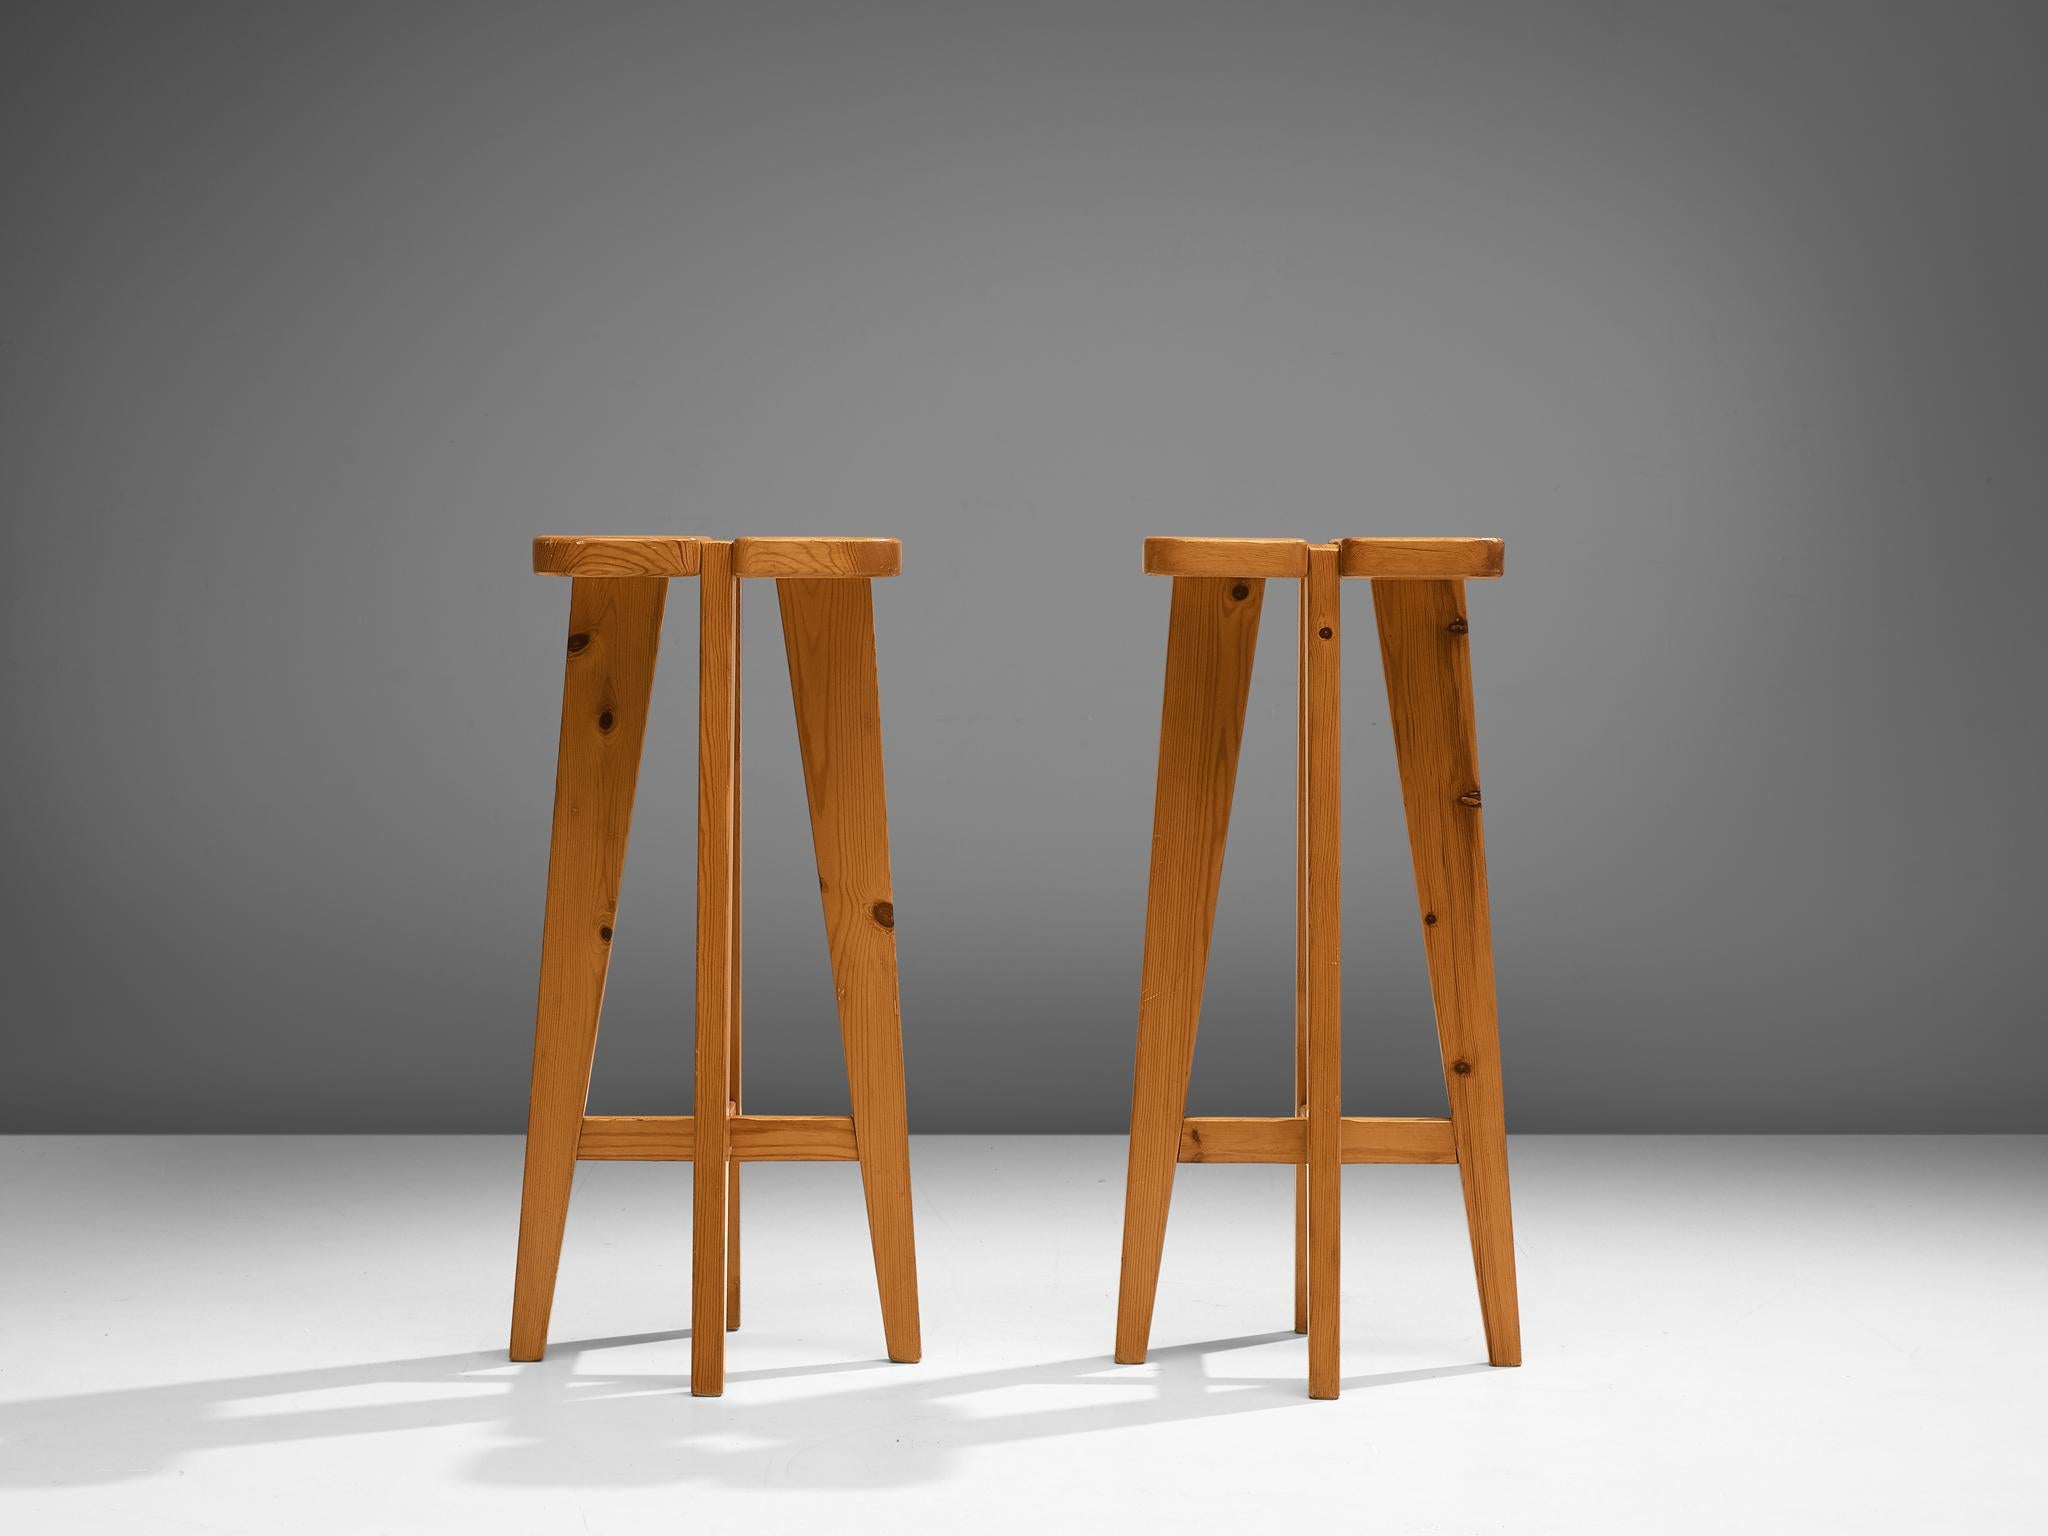 Pair of Barstools in Solid Pine by Lisa Johansson Pape (Finnisch)